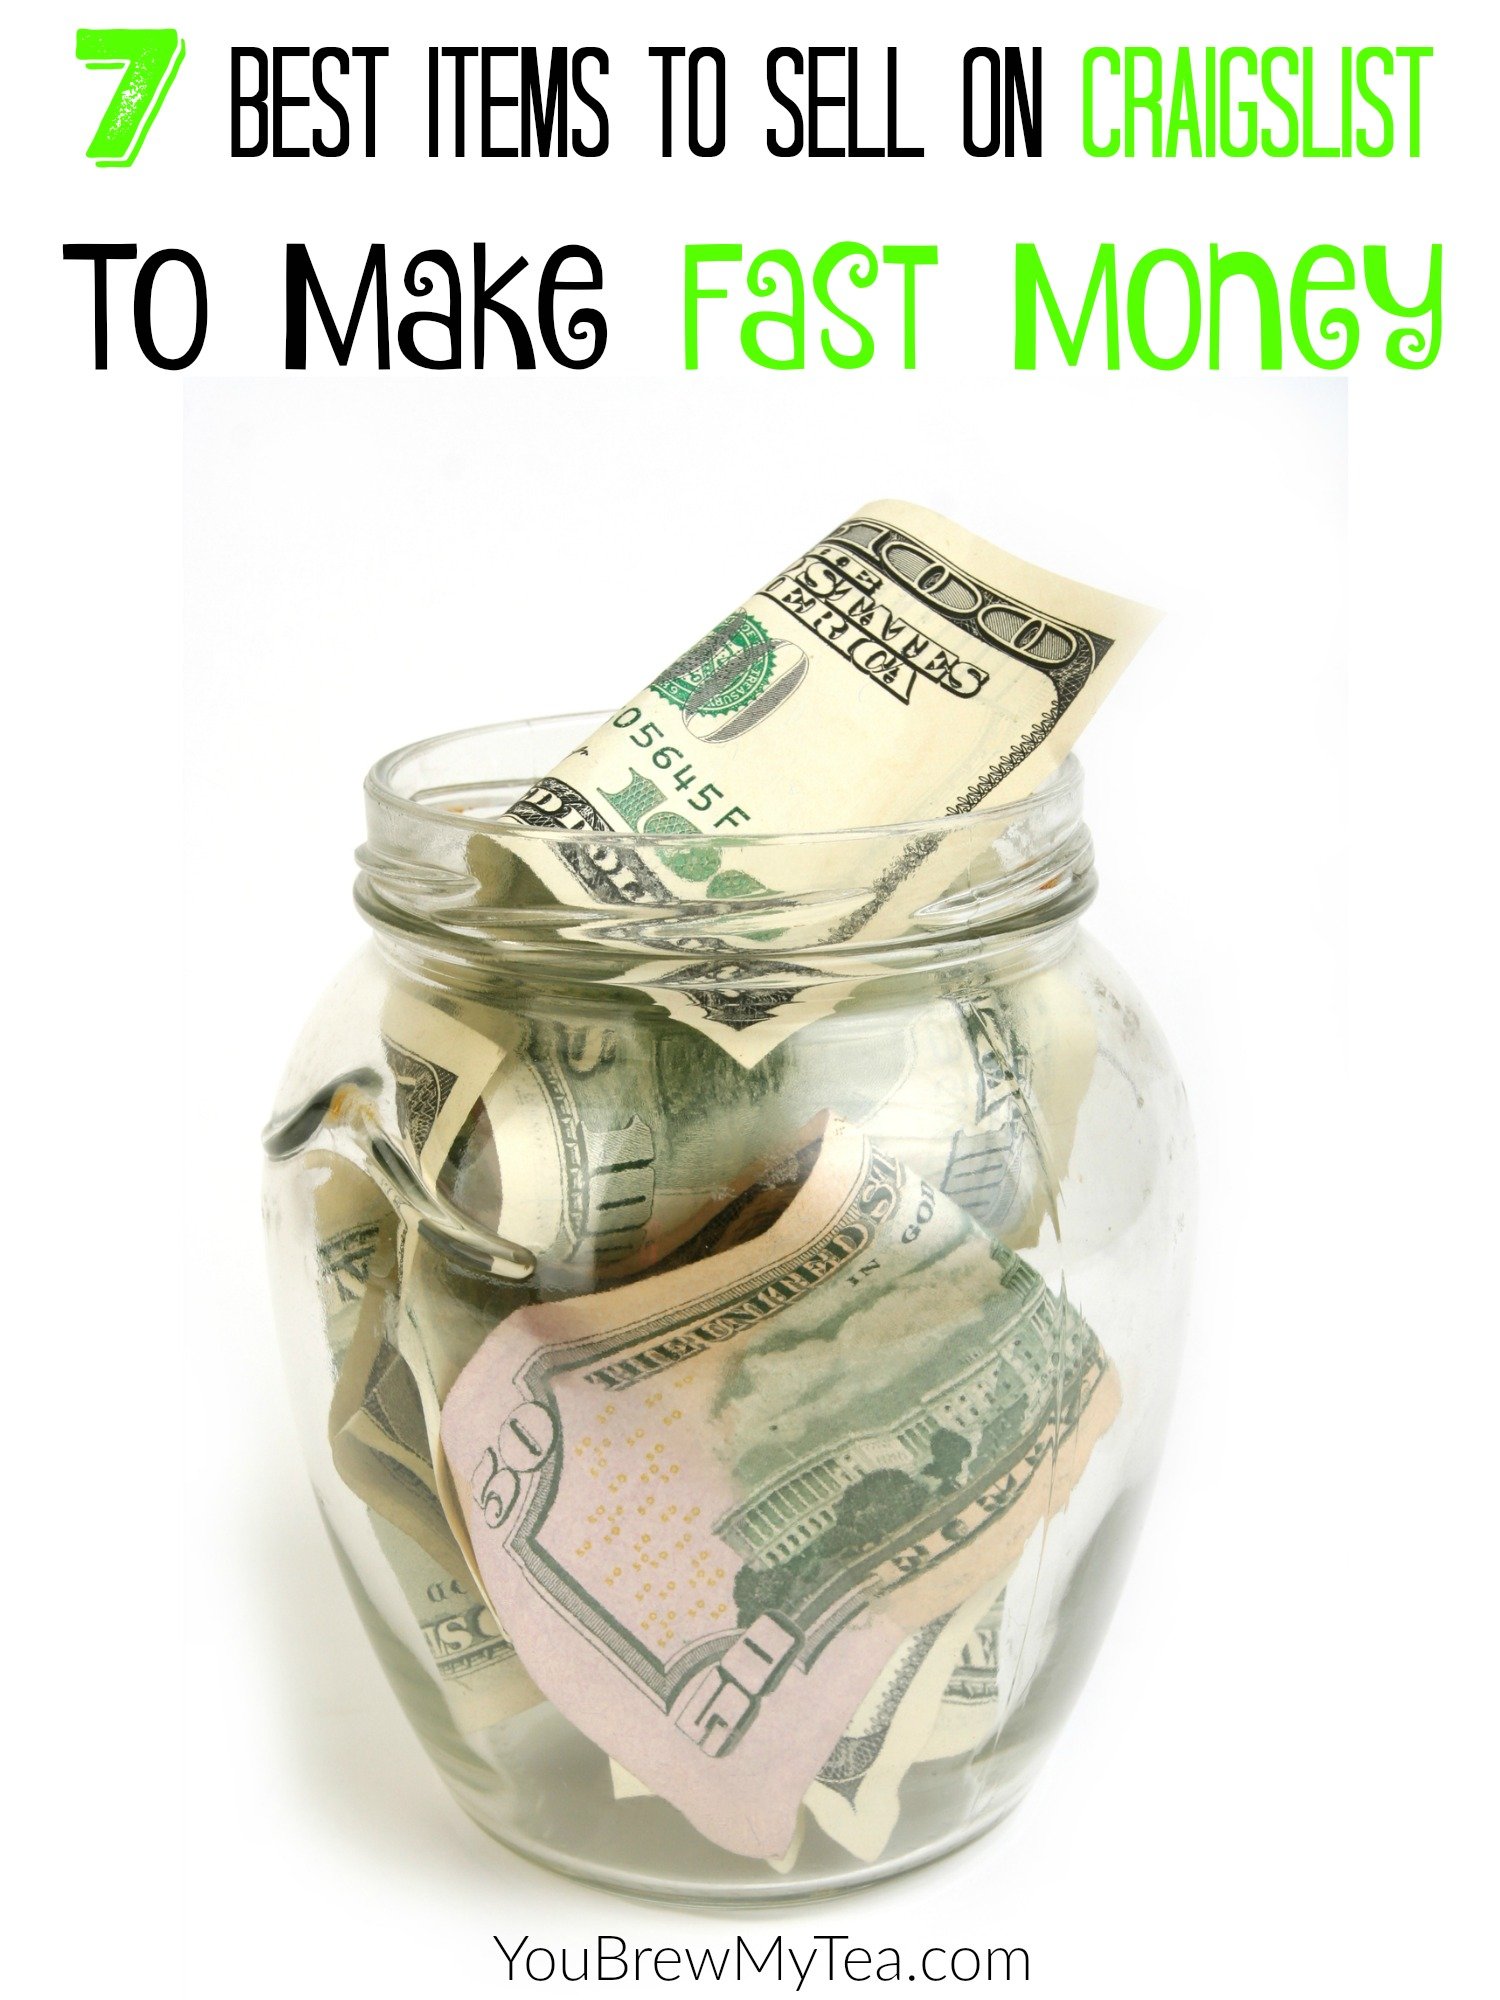 7 Best Items To Sell On Craigslist To Make Fast Money ...